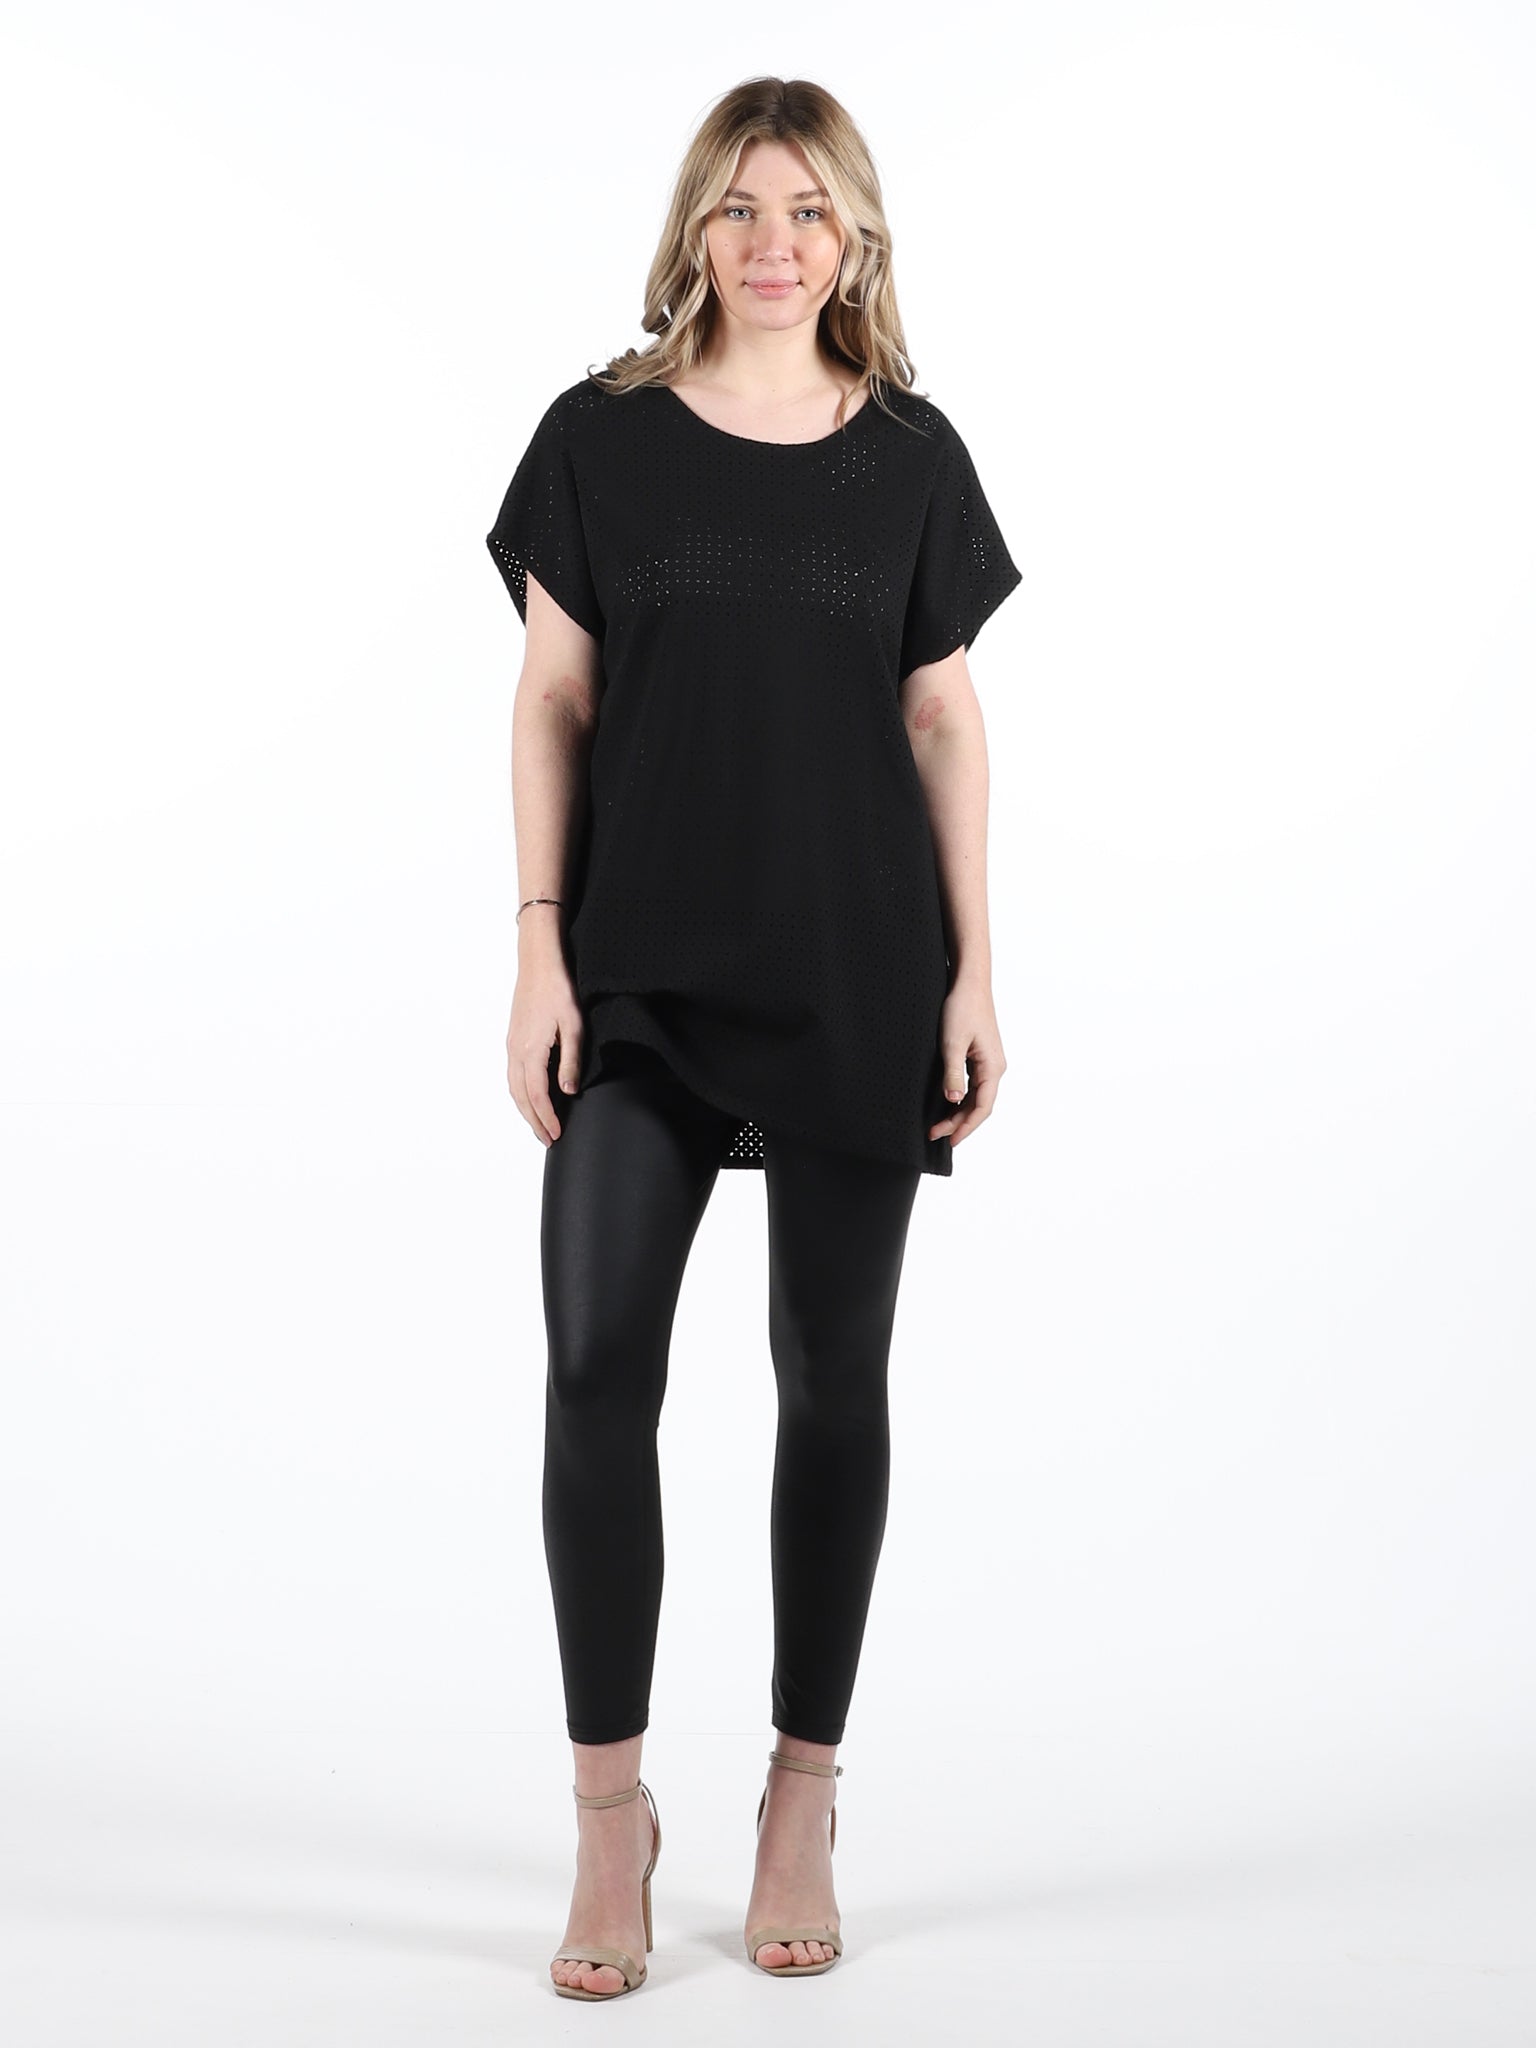 Black Jersey Hitched T-Shirt with Hole Pattern